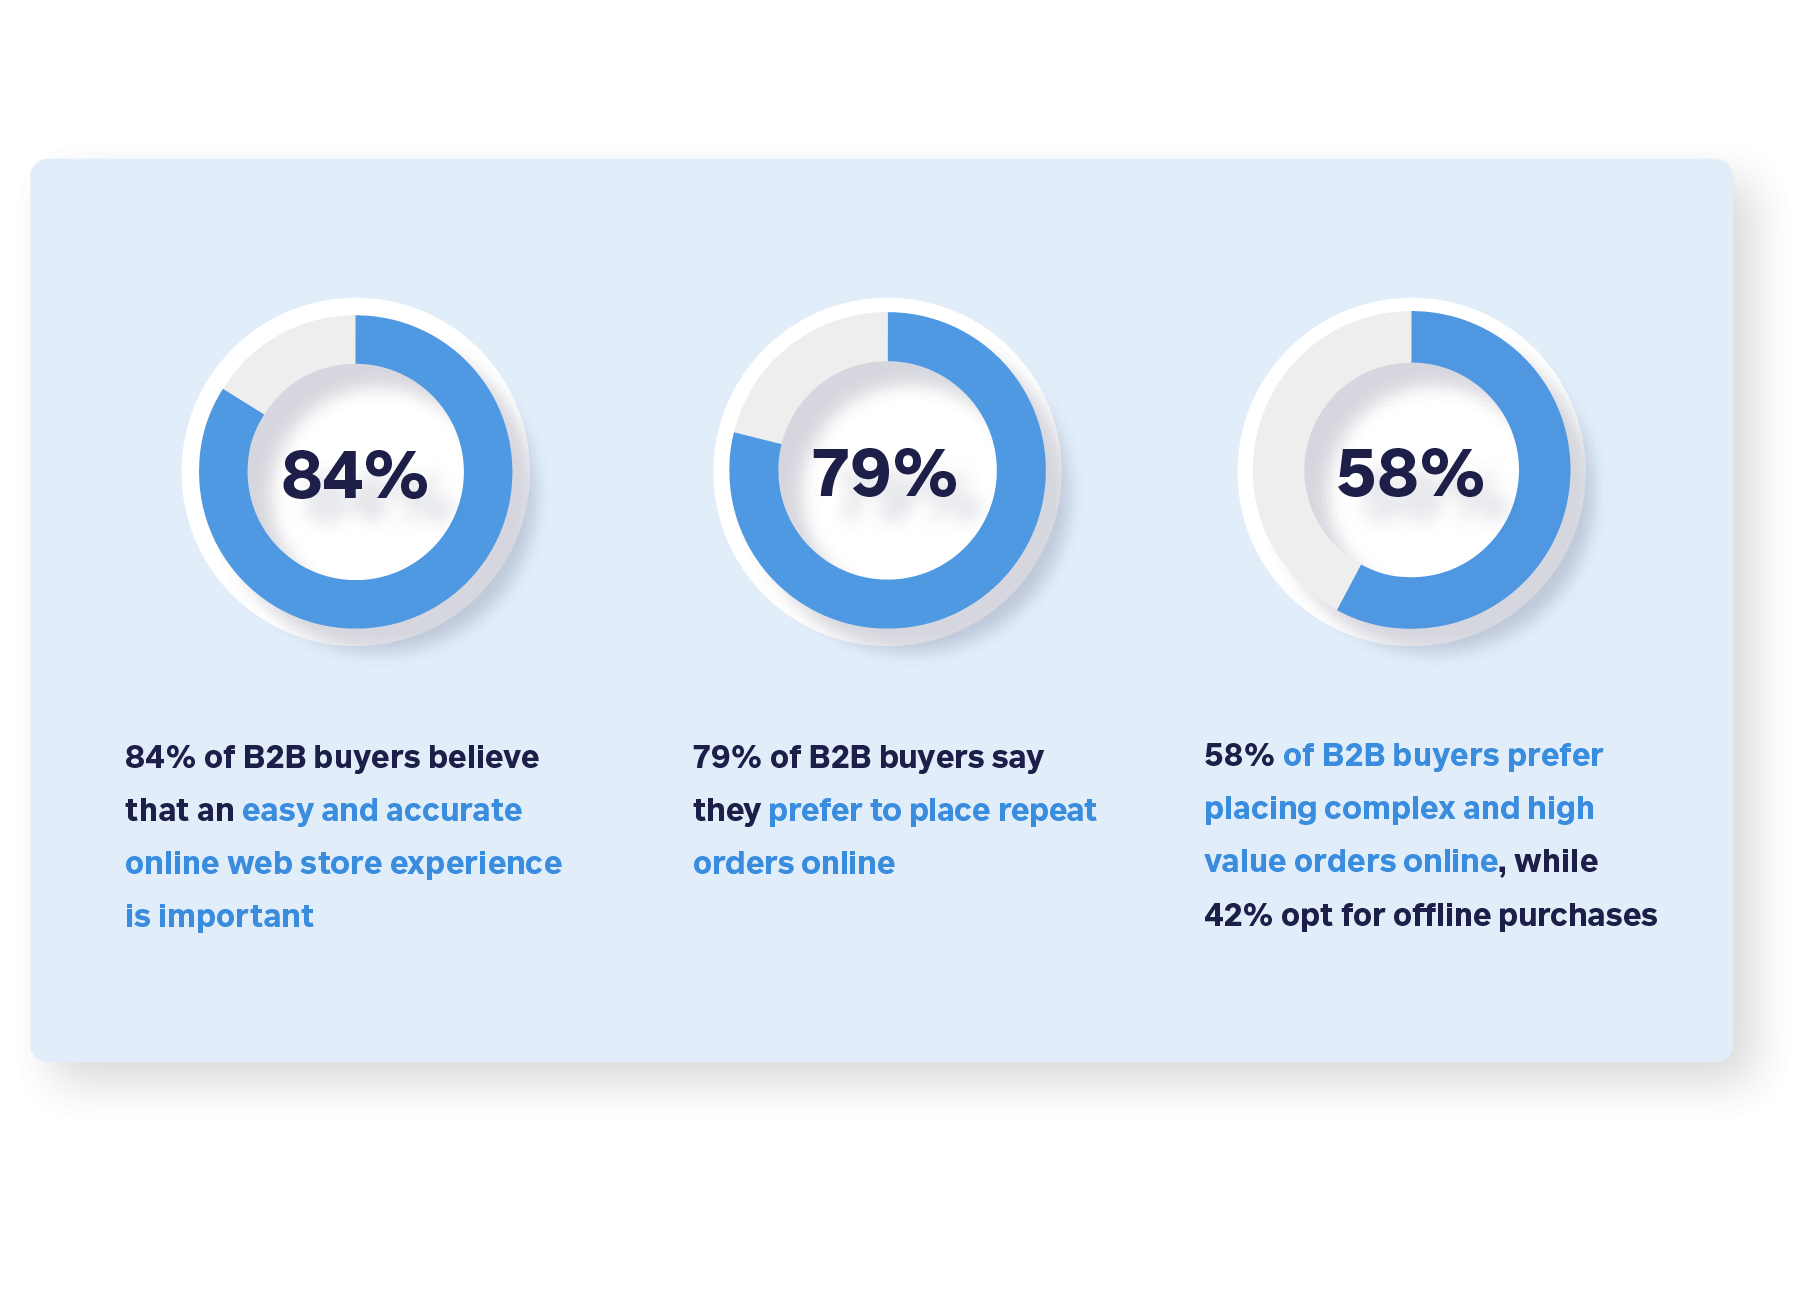 84% of B2B buyers believe that an easy and accurate online web store experience is important. 79% of B2B buyers say they prefer to place repeat orders online. 58% of B2B buyers prefer placing complex and high value orders online, while 42% opt for offline purchases.